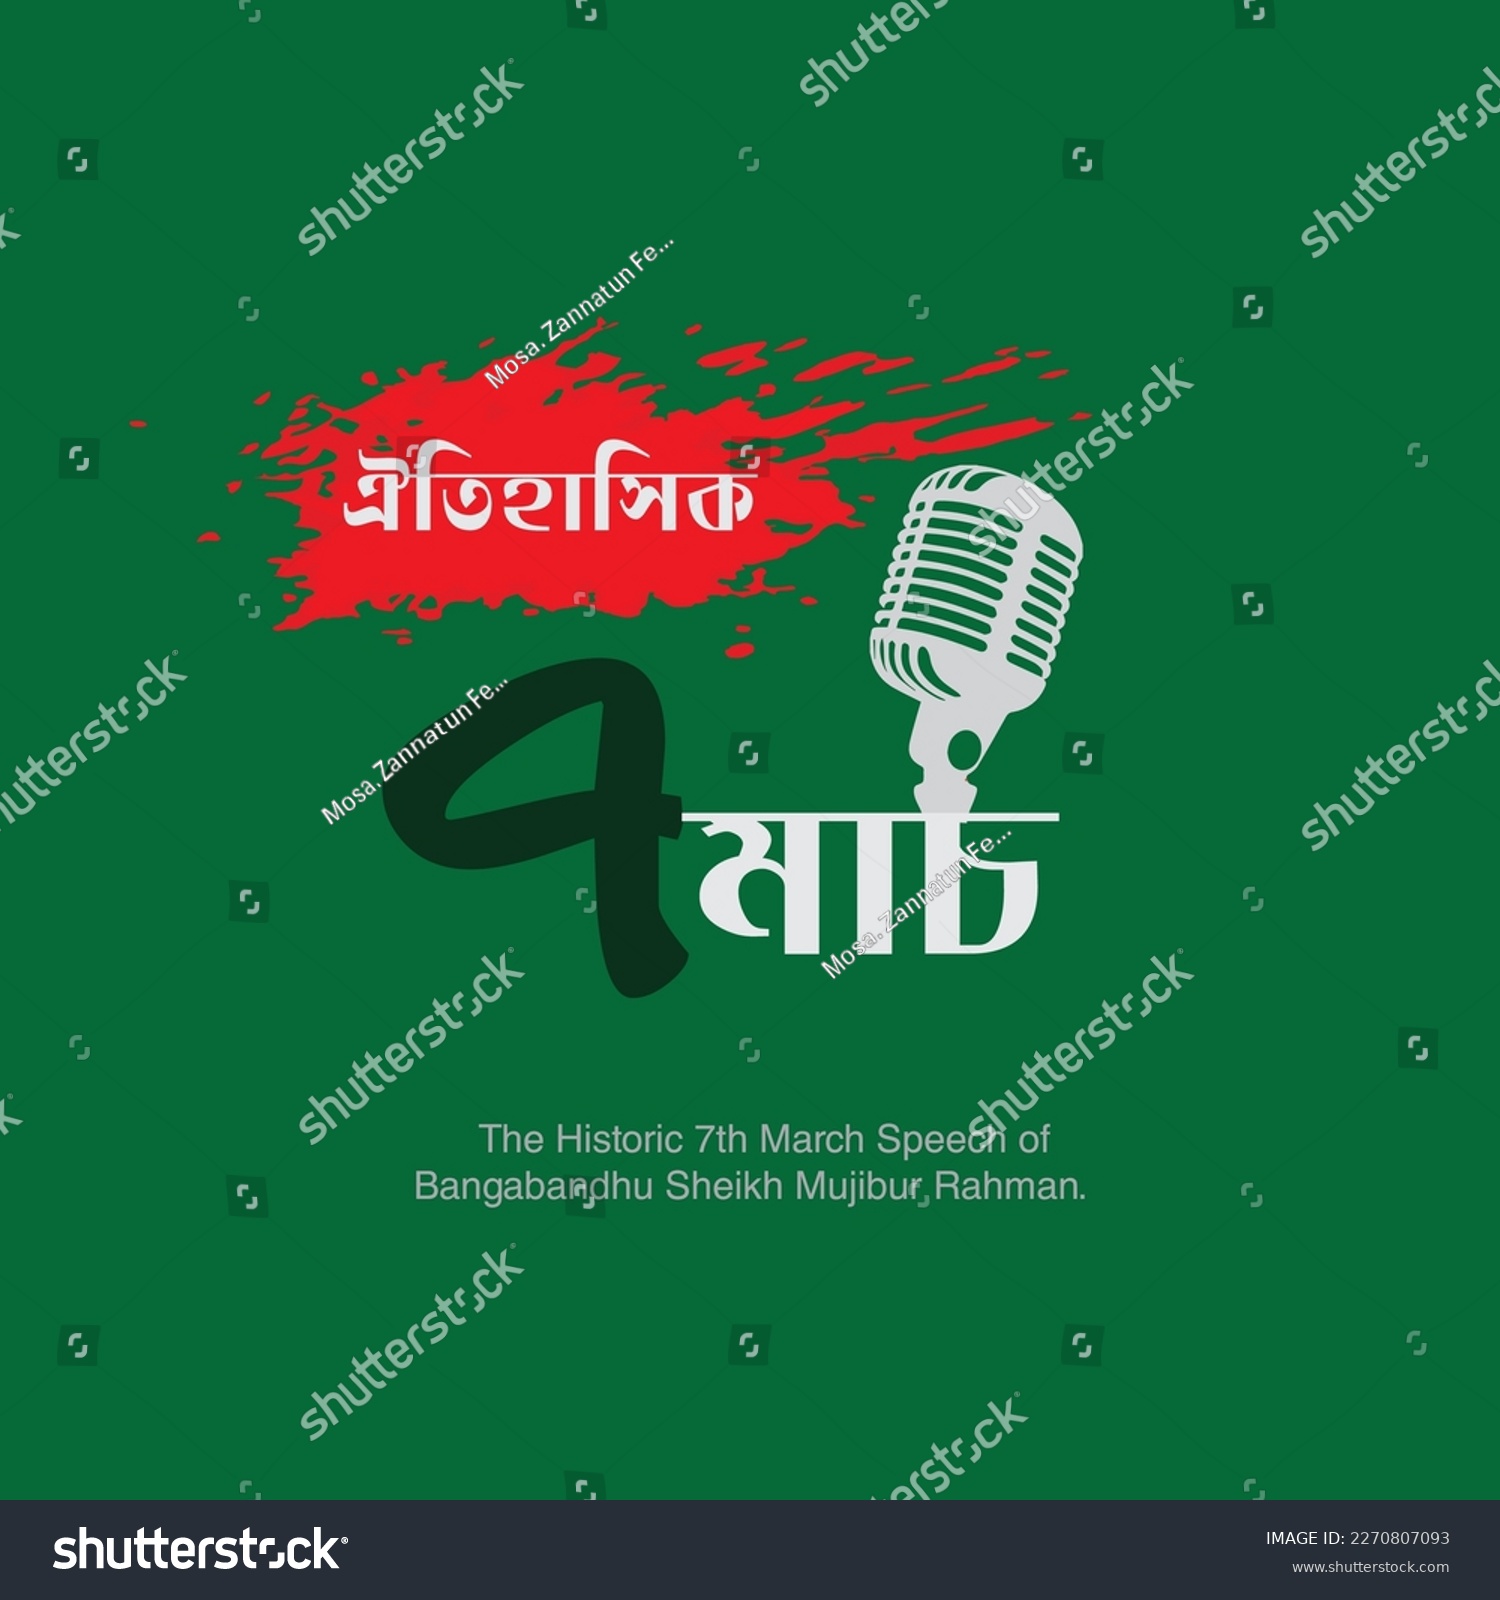 SVG of Vector illustration on The Historic 7th March Speech of Bangabandhu Sheikh Mujibur Rahman was delivered by Bangabandhu Sheikh Mujibur Rahman on 7th March, 1971. svg